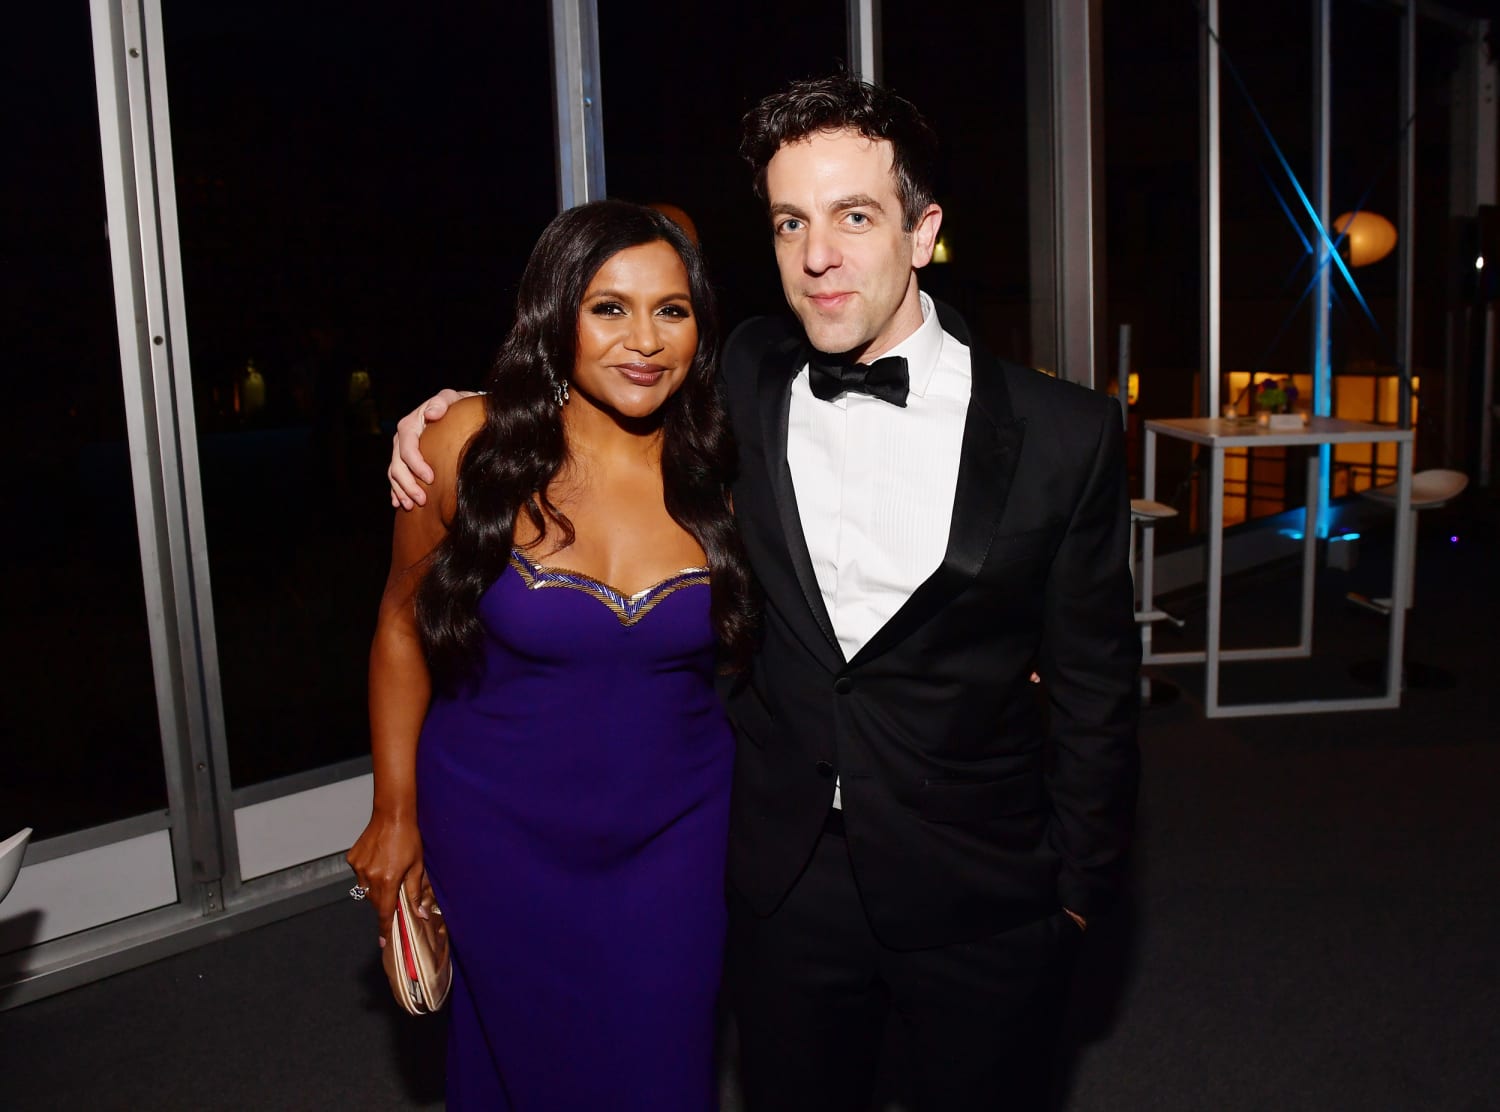 What Mindy Kaling thinks of the rumors that